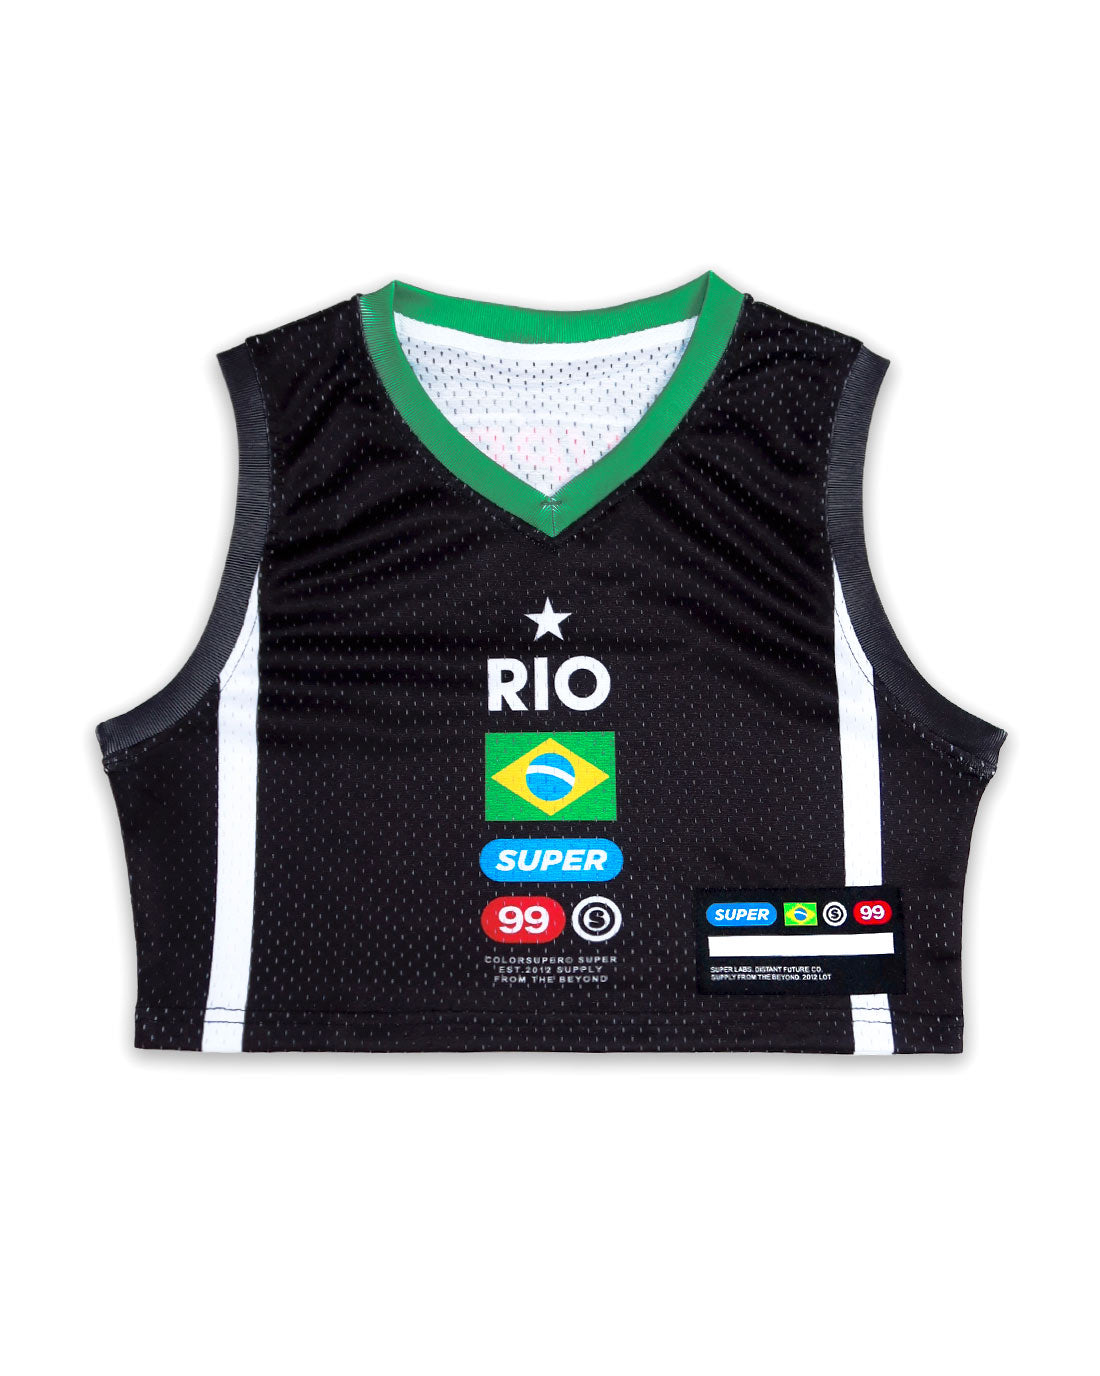 Front view of a women's sleeveless basketball jersey crop top in black with green neck trim, featuring lightweight mesh fabric and Brazilian-inspired graphics.